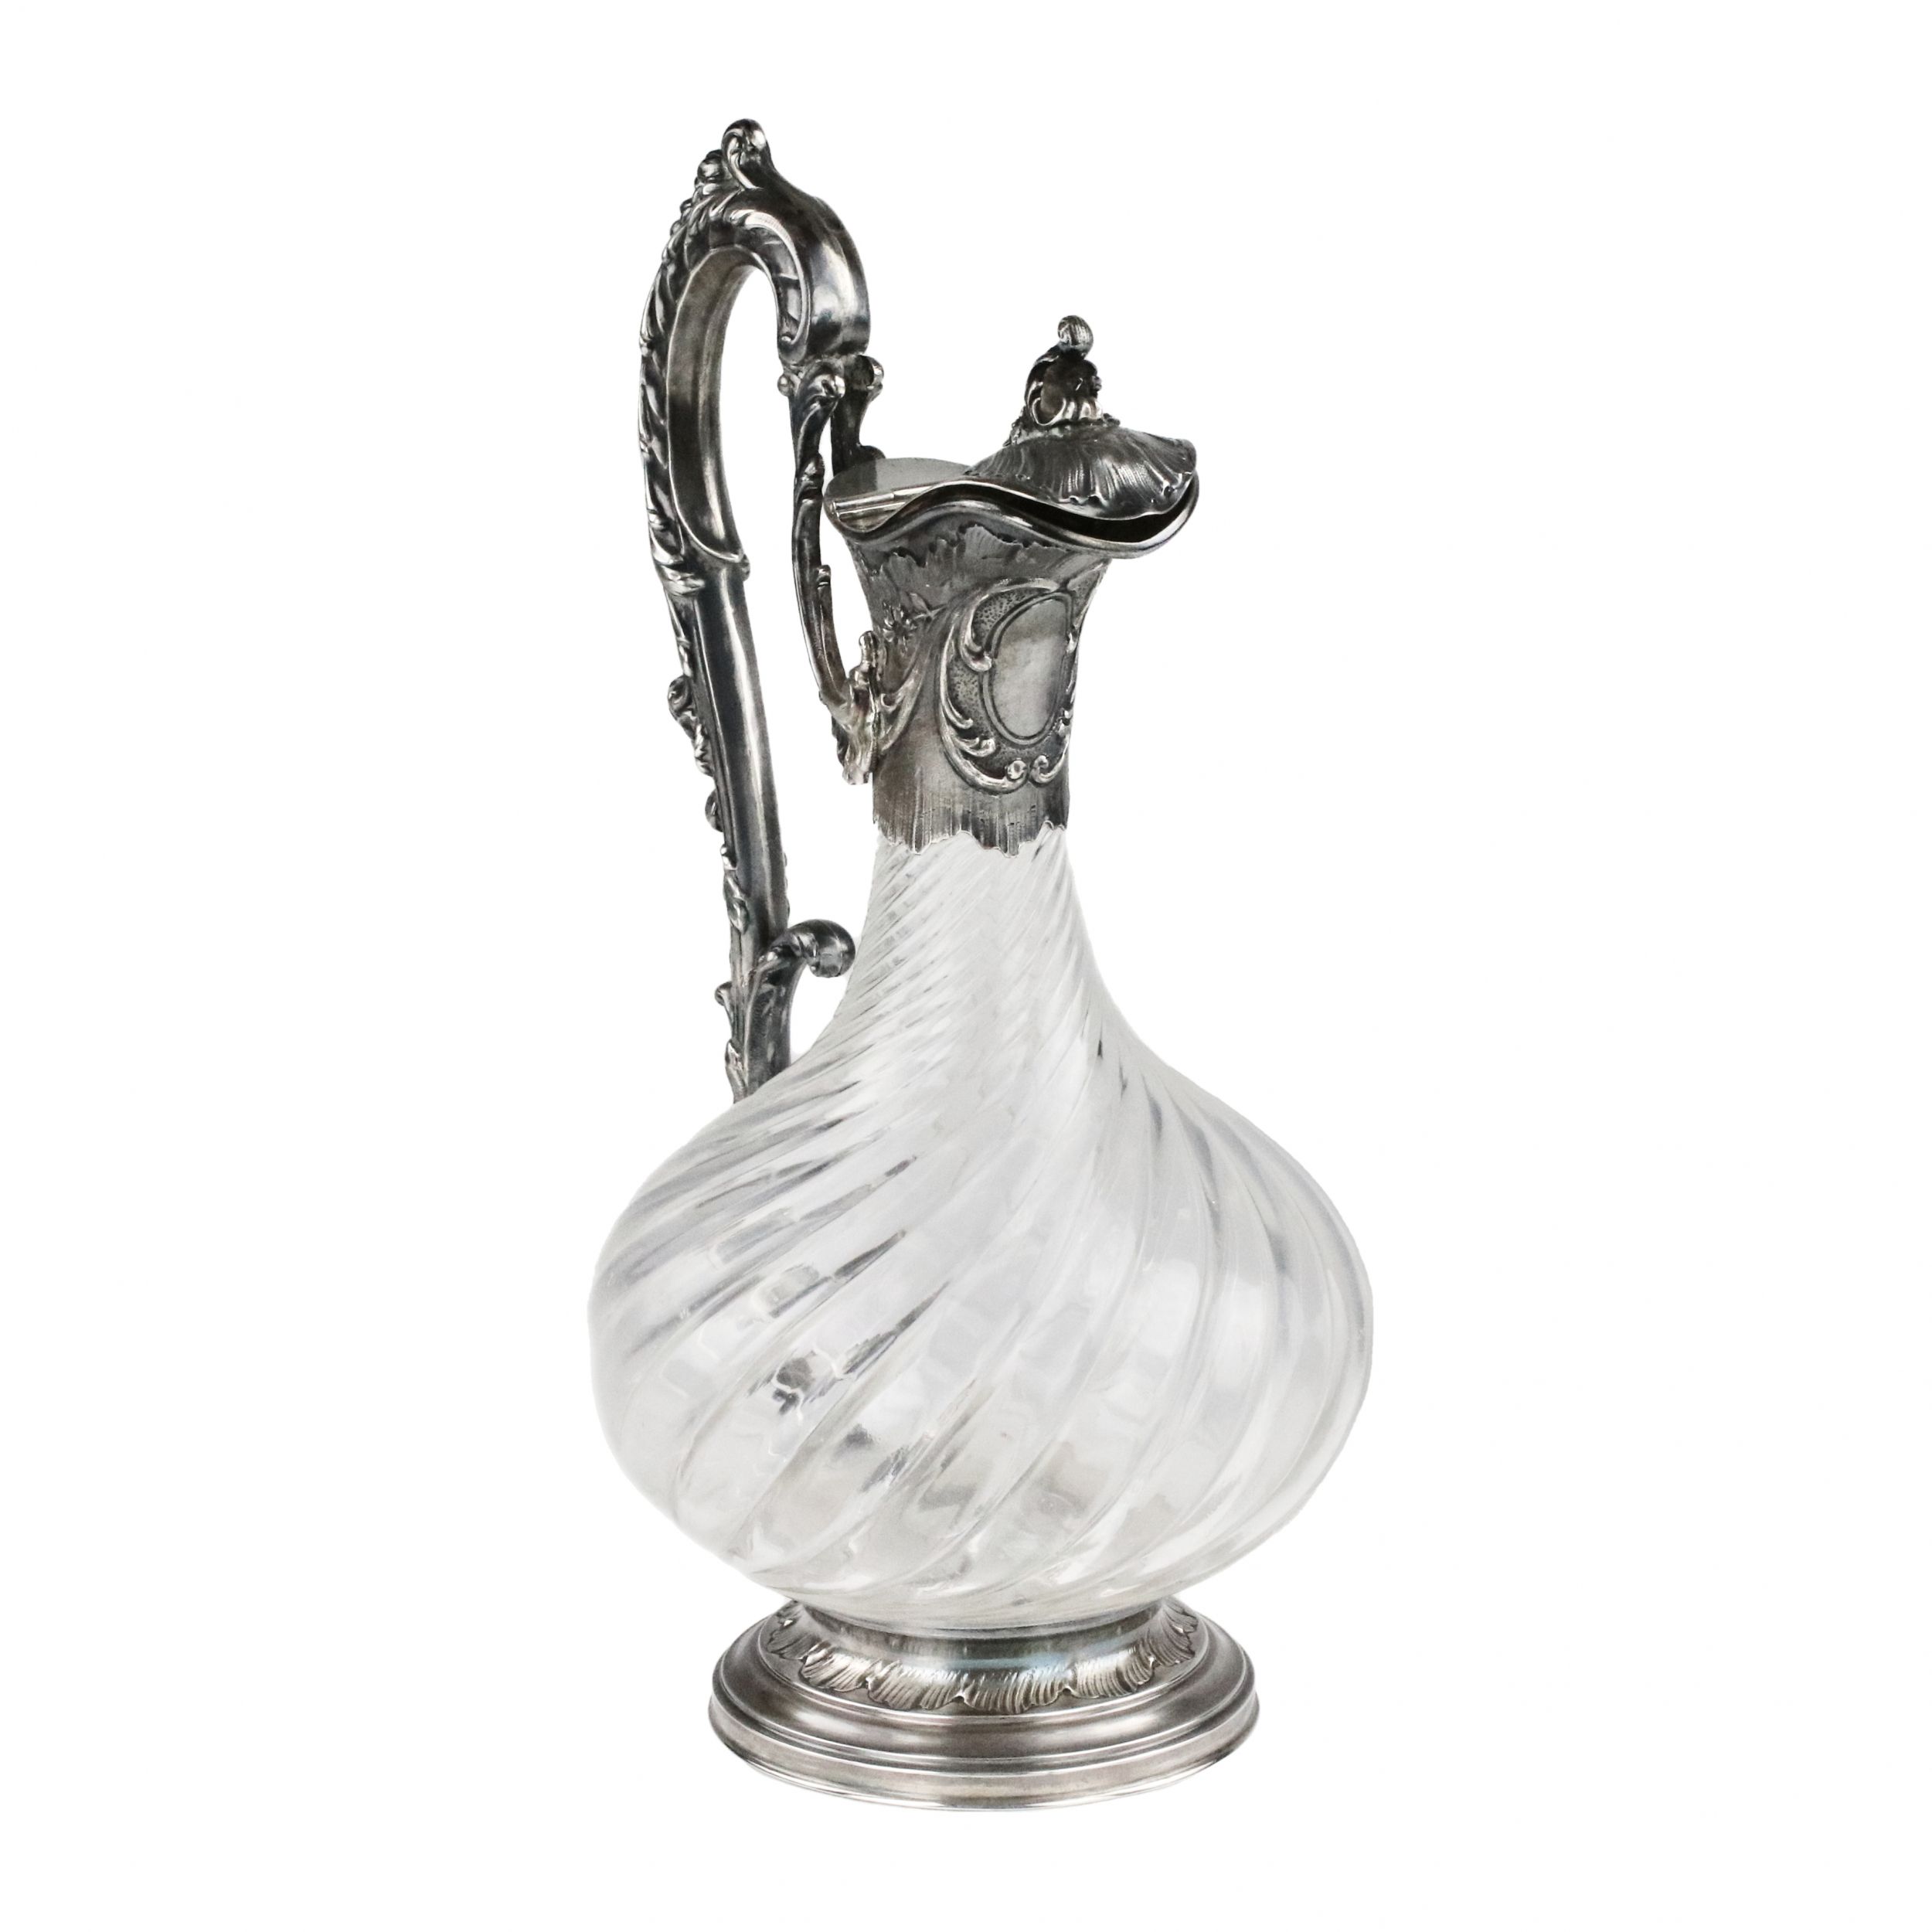 CHEVRON Freres. French crystal jug in silver. - Image 3 of 7